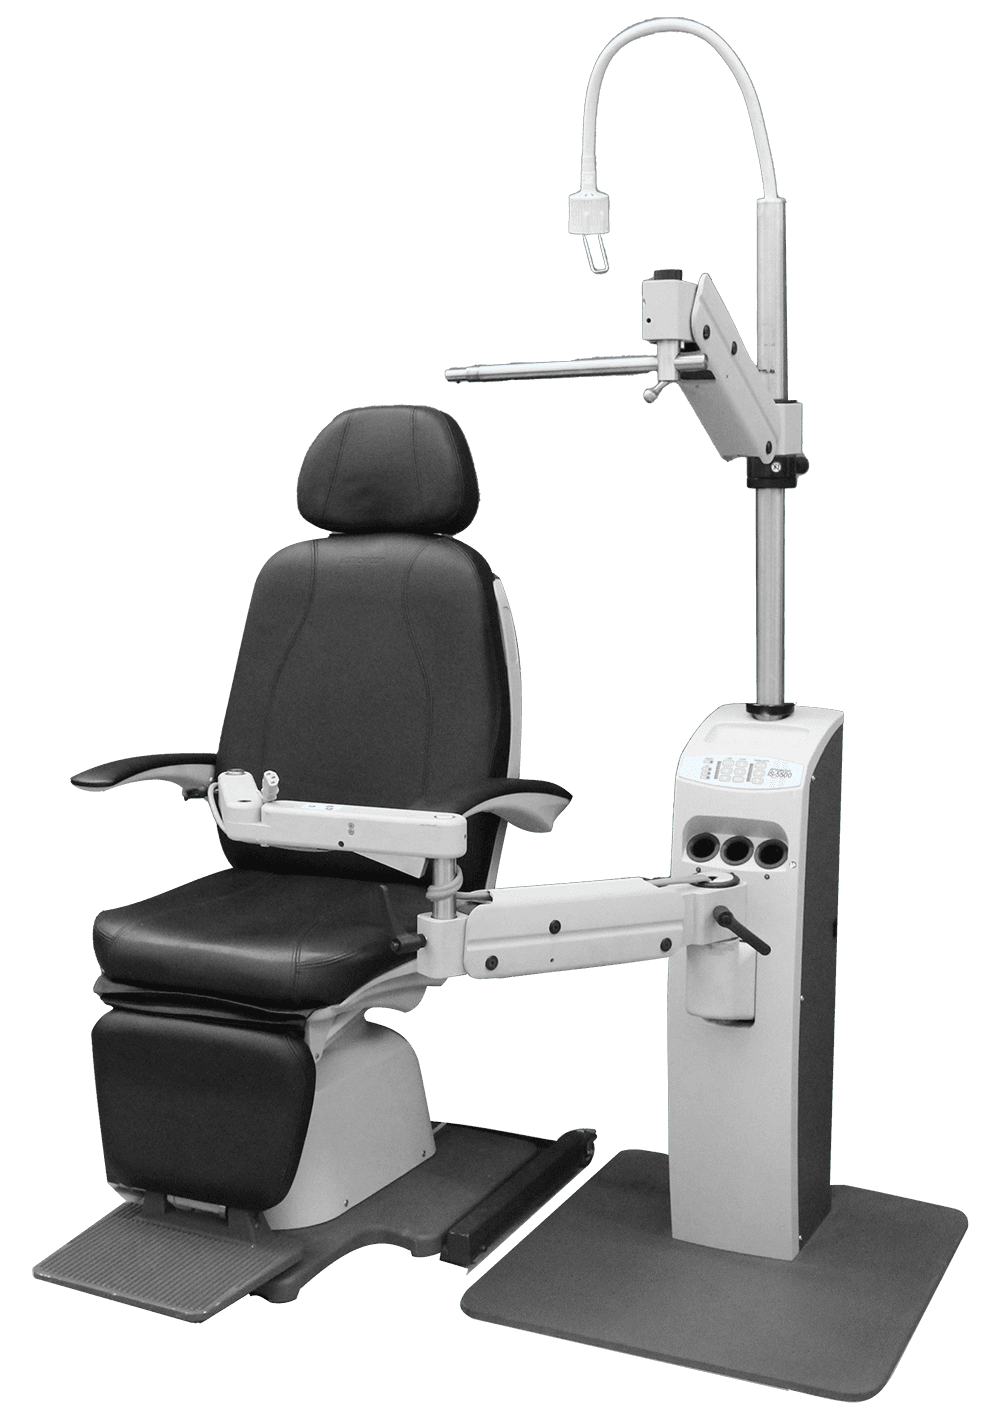 topcon-OC-2200 chair-is5500-standside